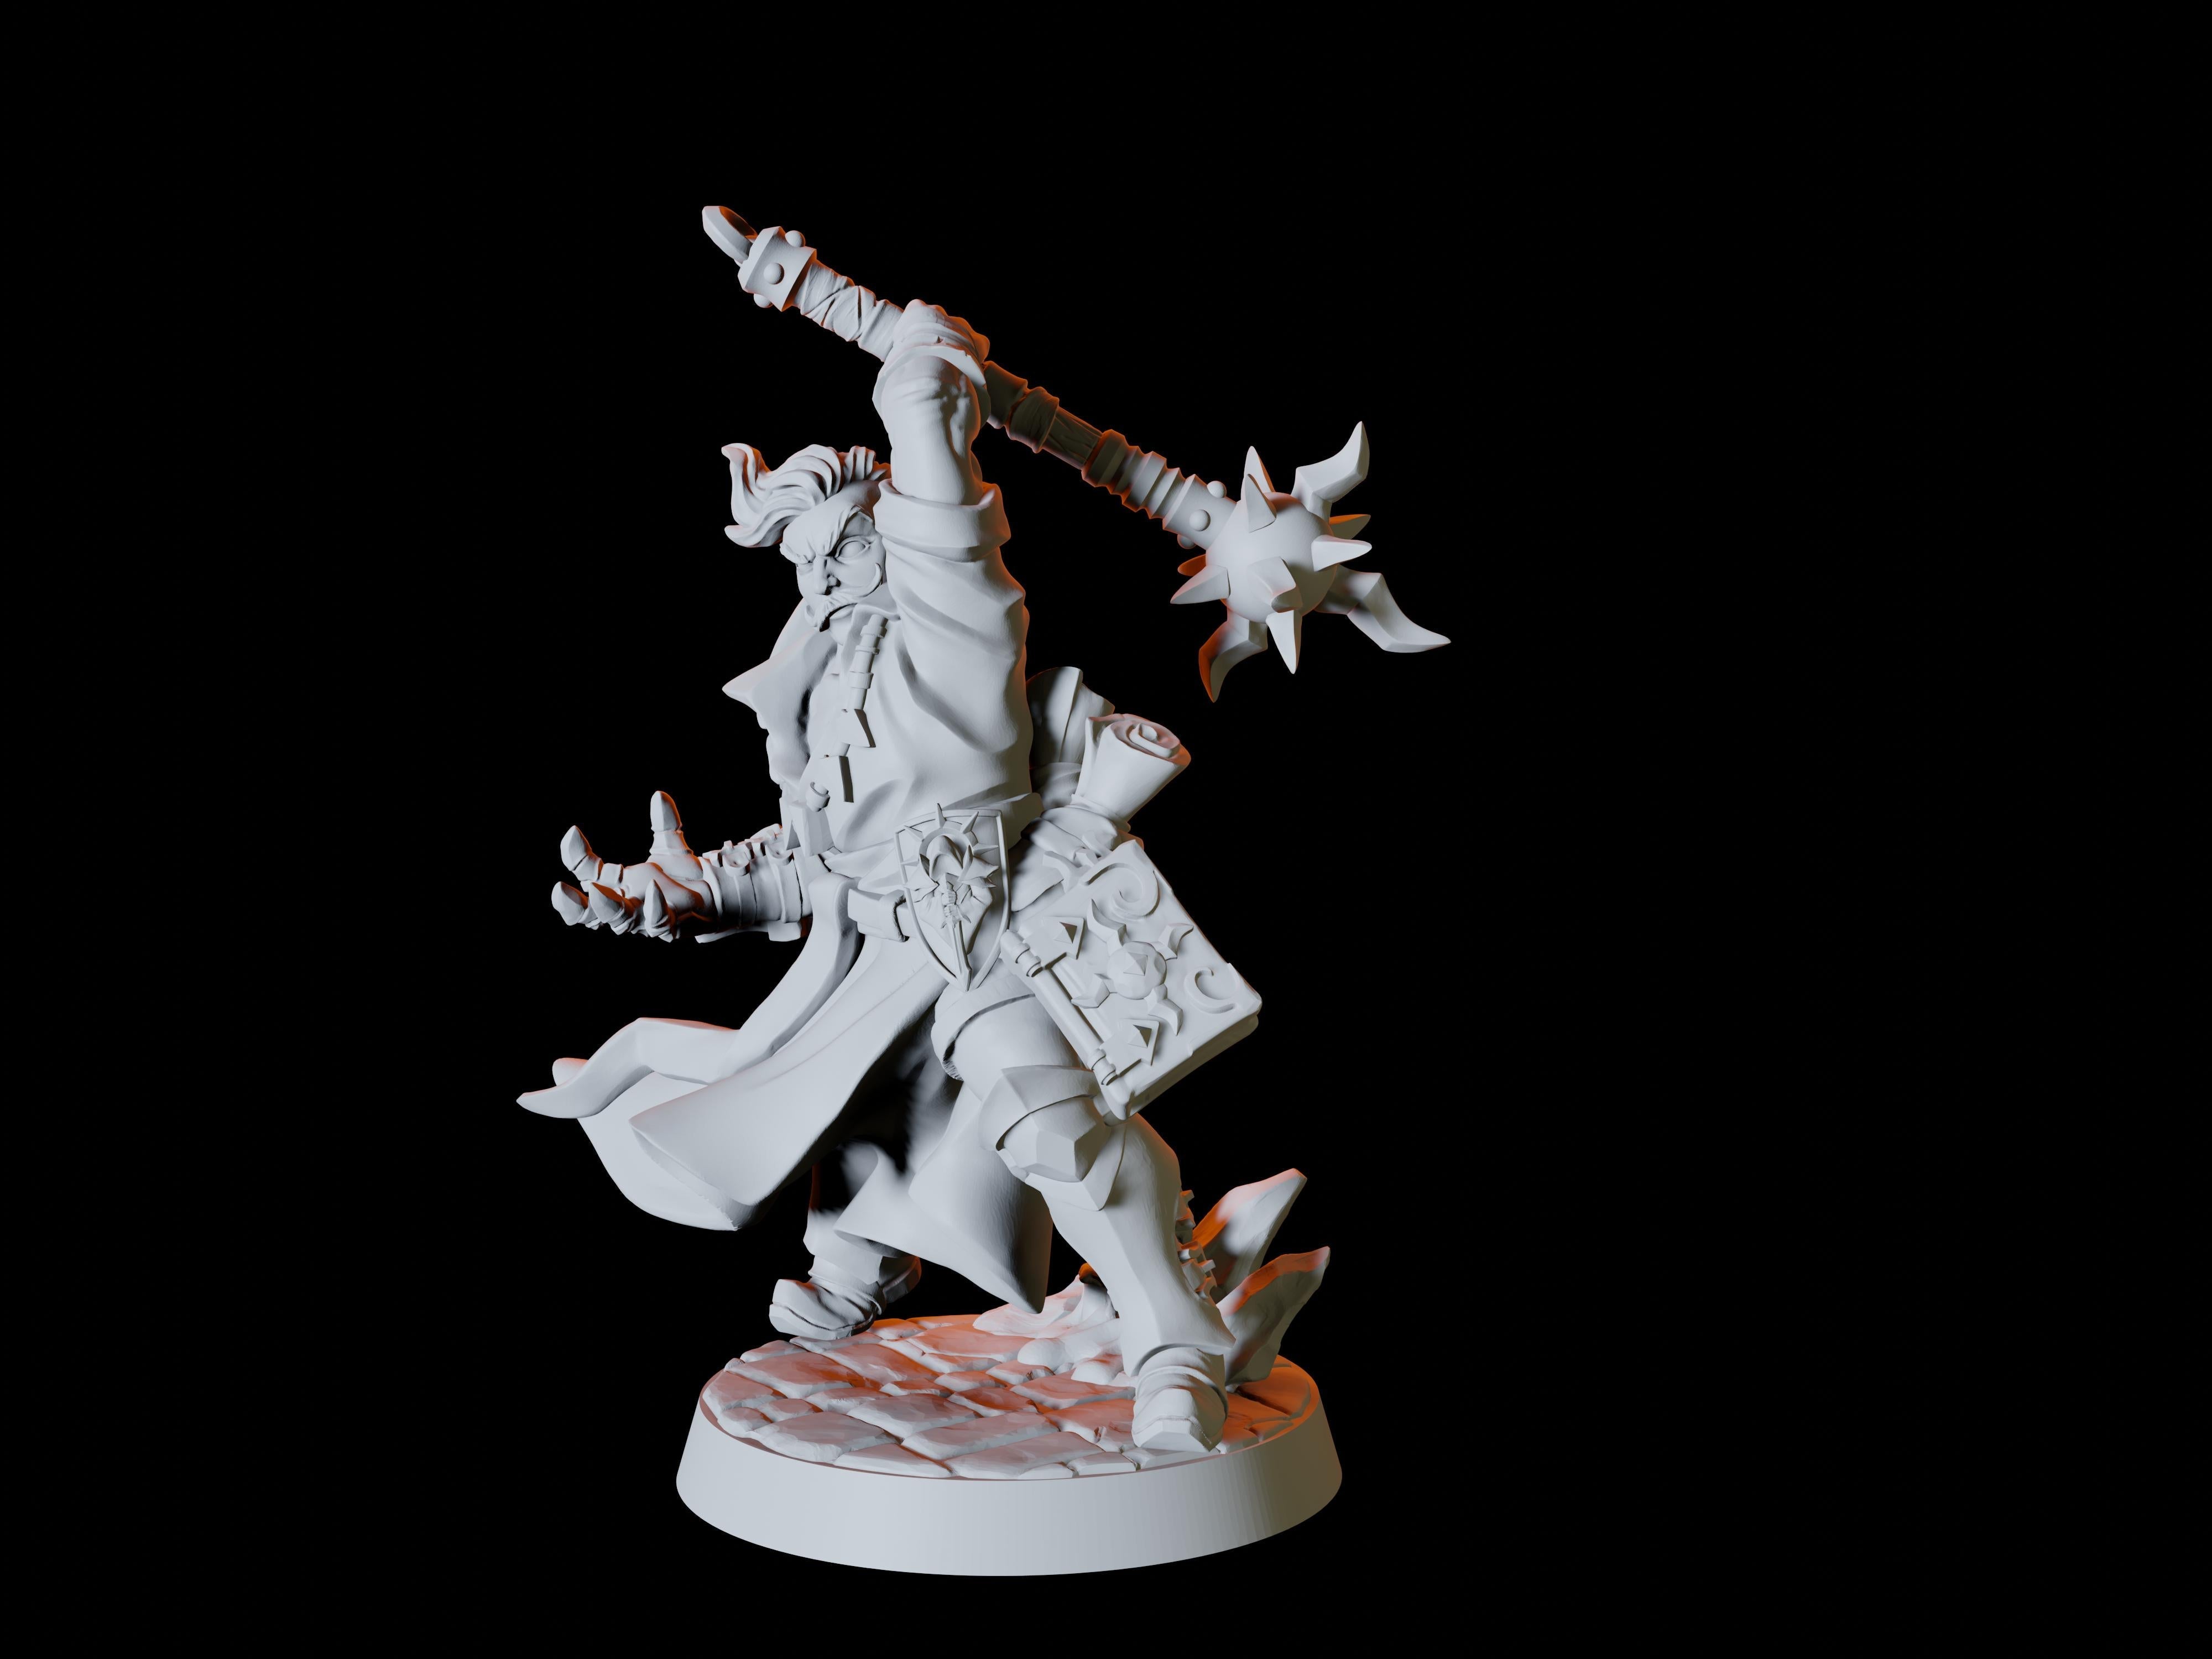 Human Warlock Warrior Miniature for Dungeons and Dragons - Myth Forged